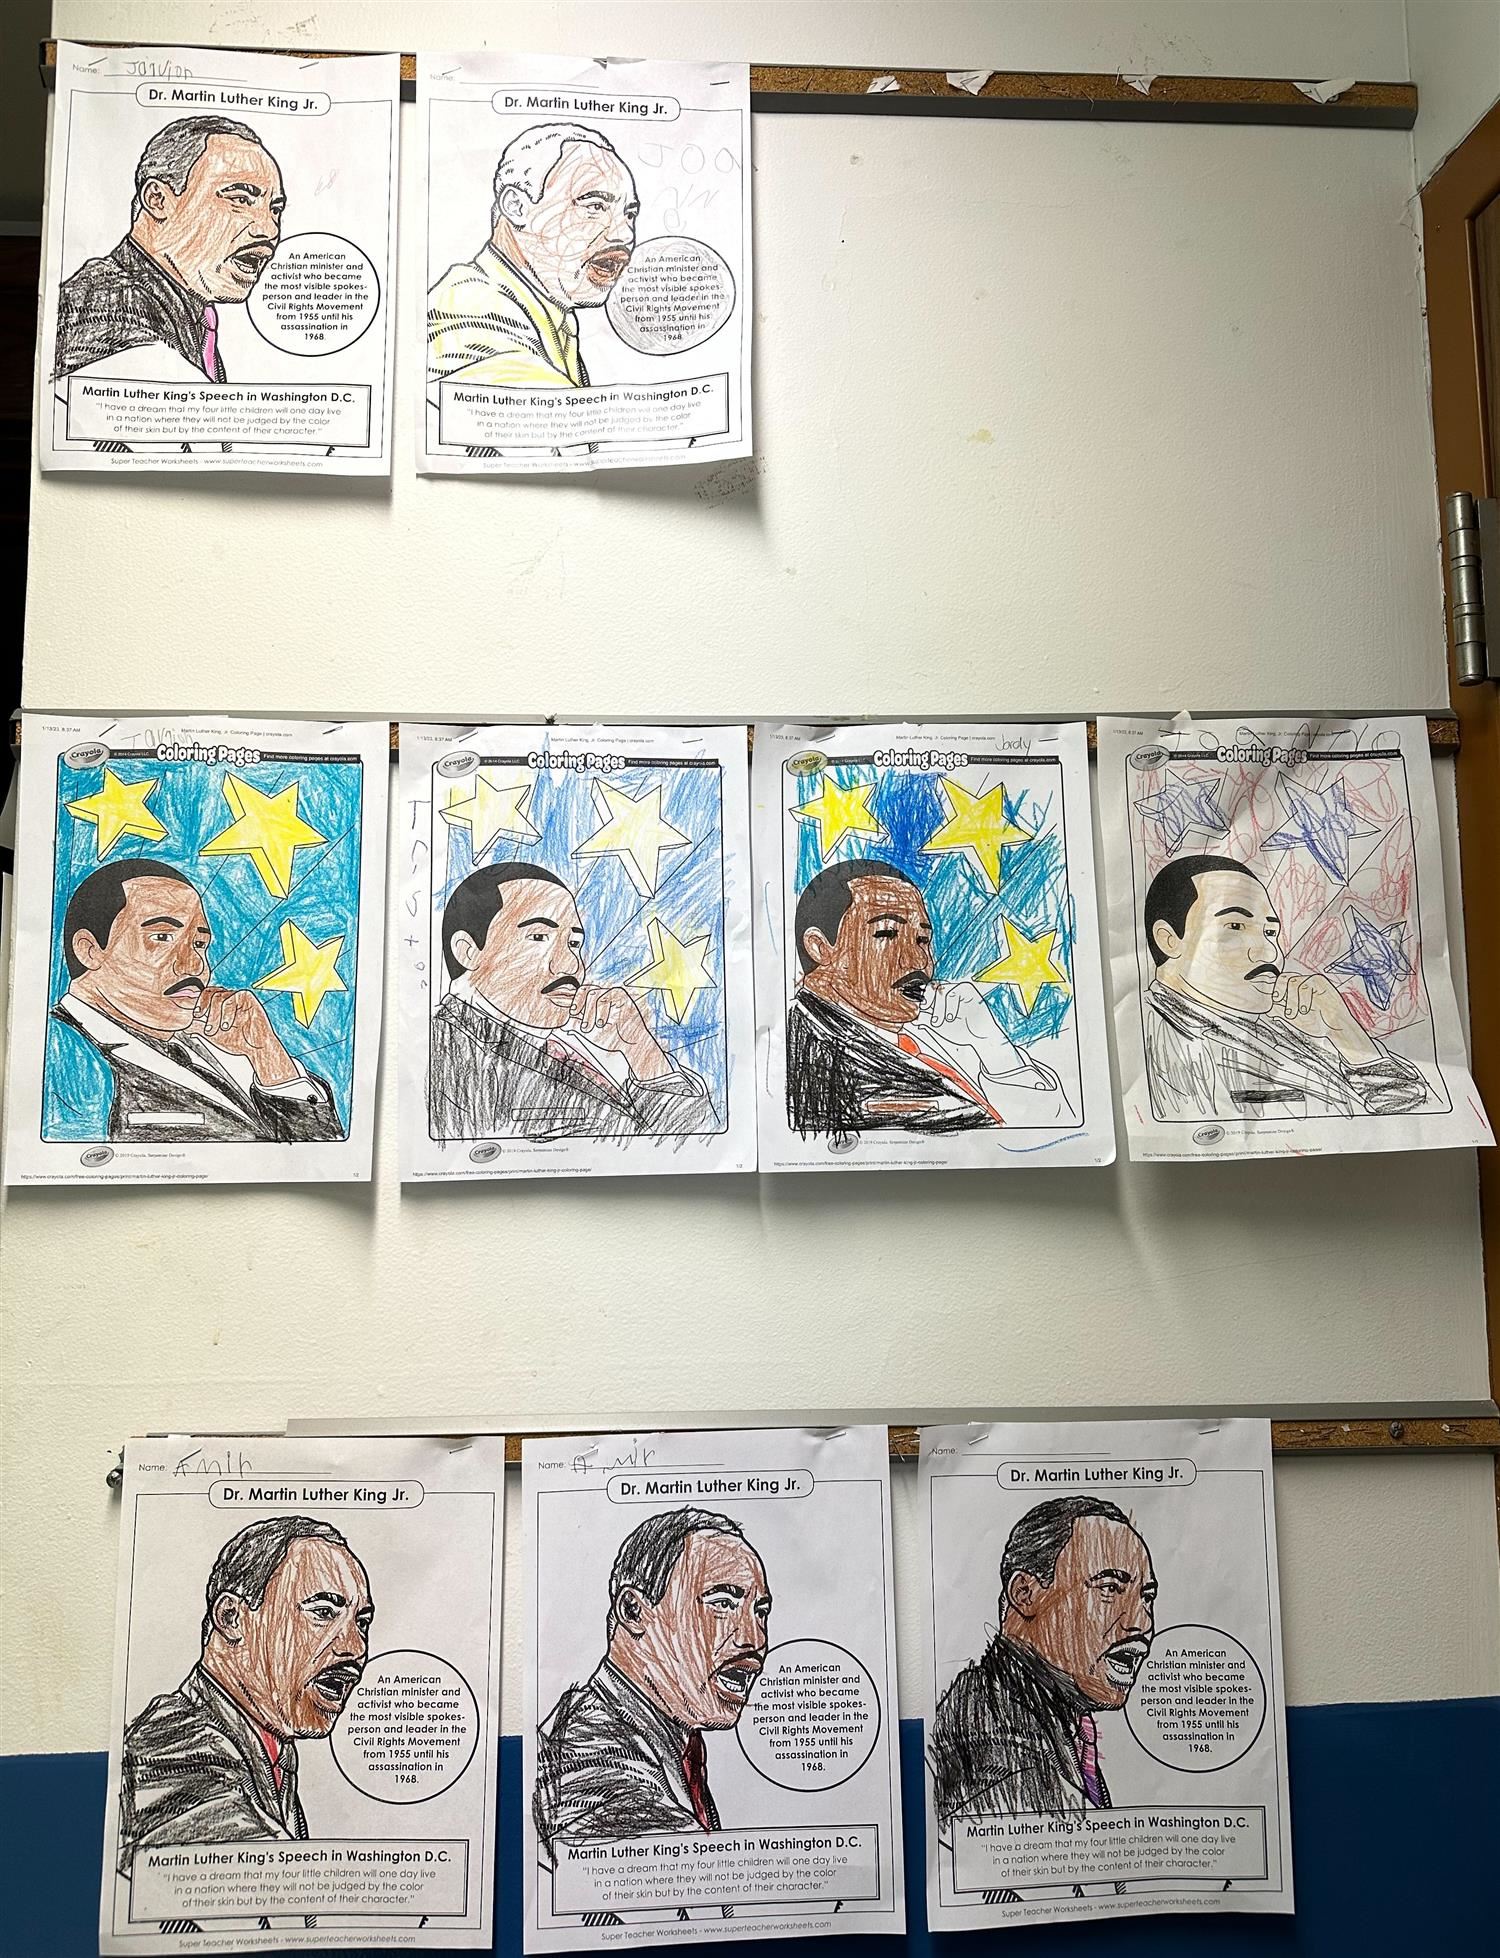 Nine coloring pages with pictures of Dr. Martin Luther King, Jr., displayed on a wall.